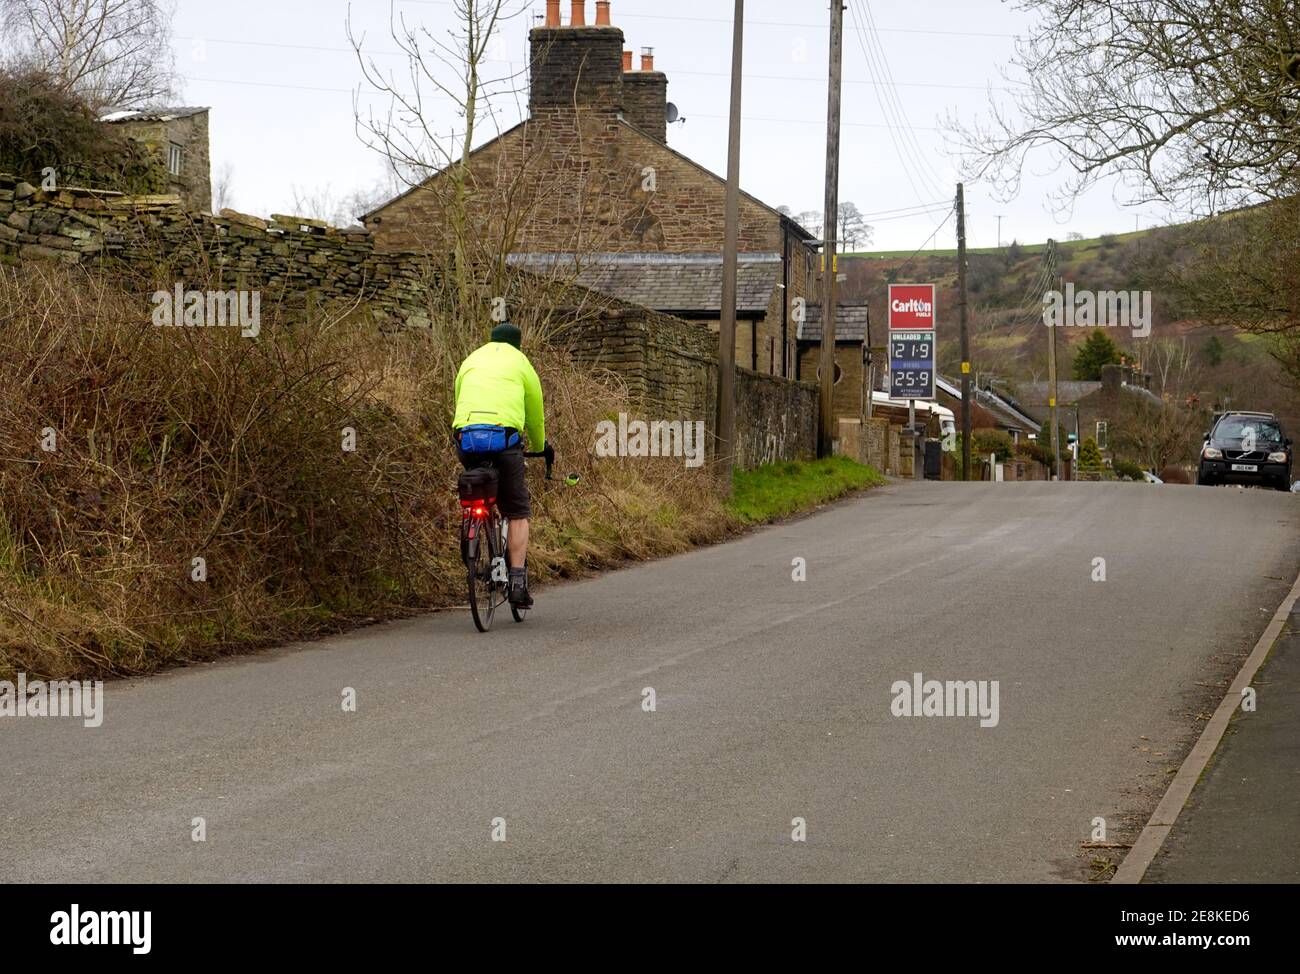 A cyclists wearing a hi-vis jacket in Thornsett, Derbyshire/ Stock Photo